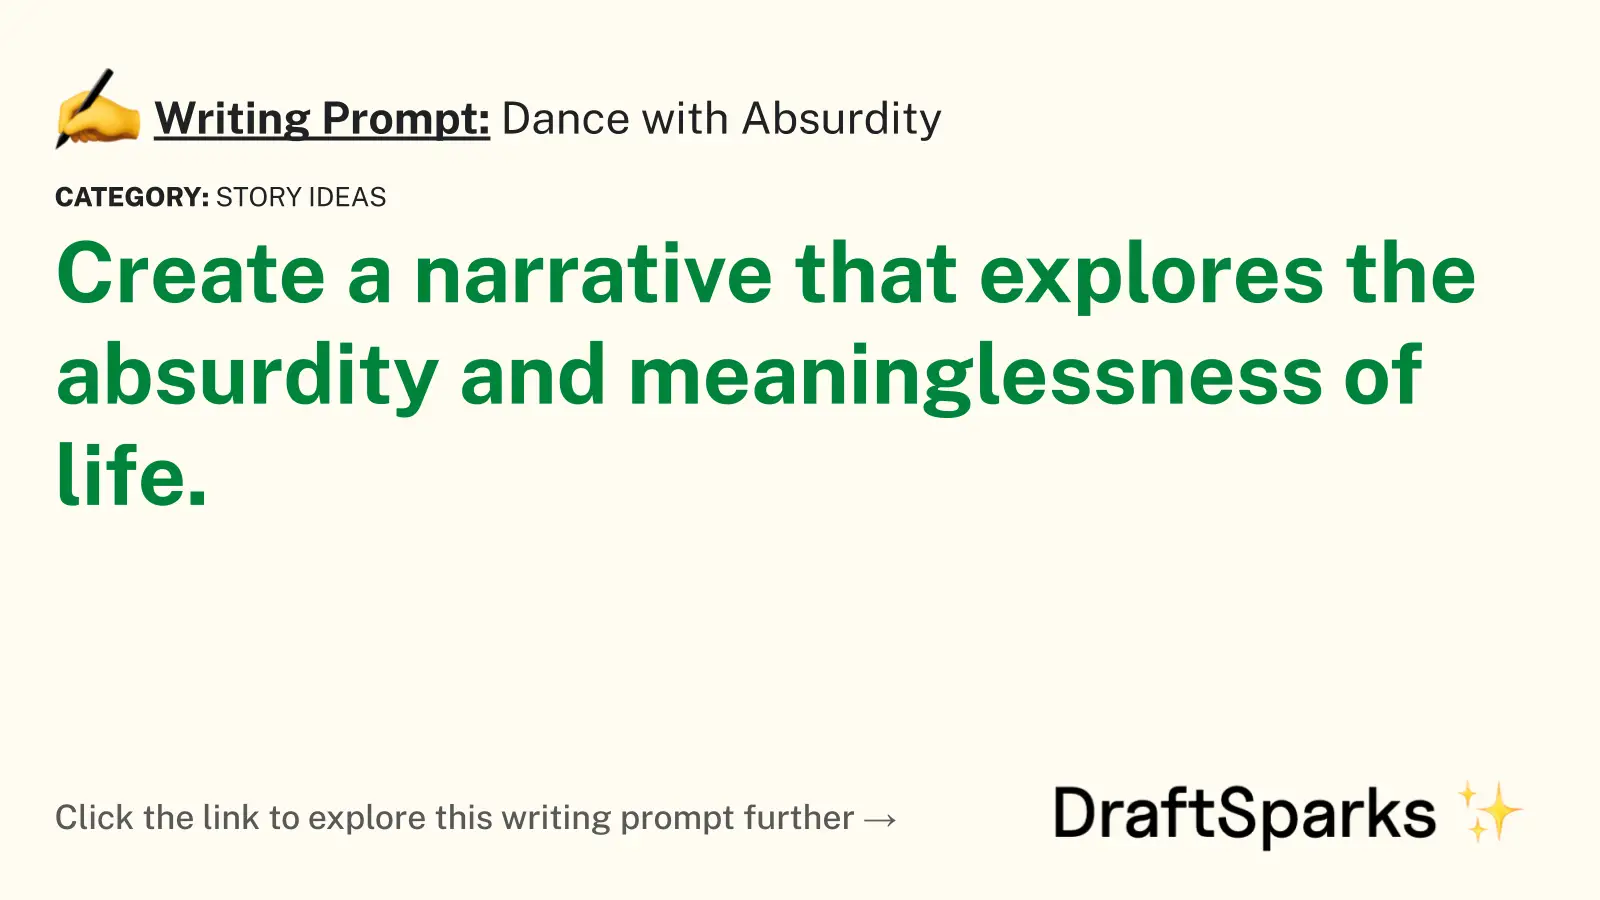 Dance with Absurdity